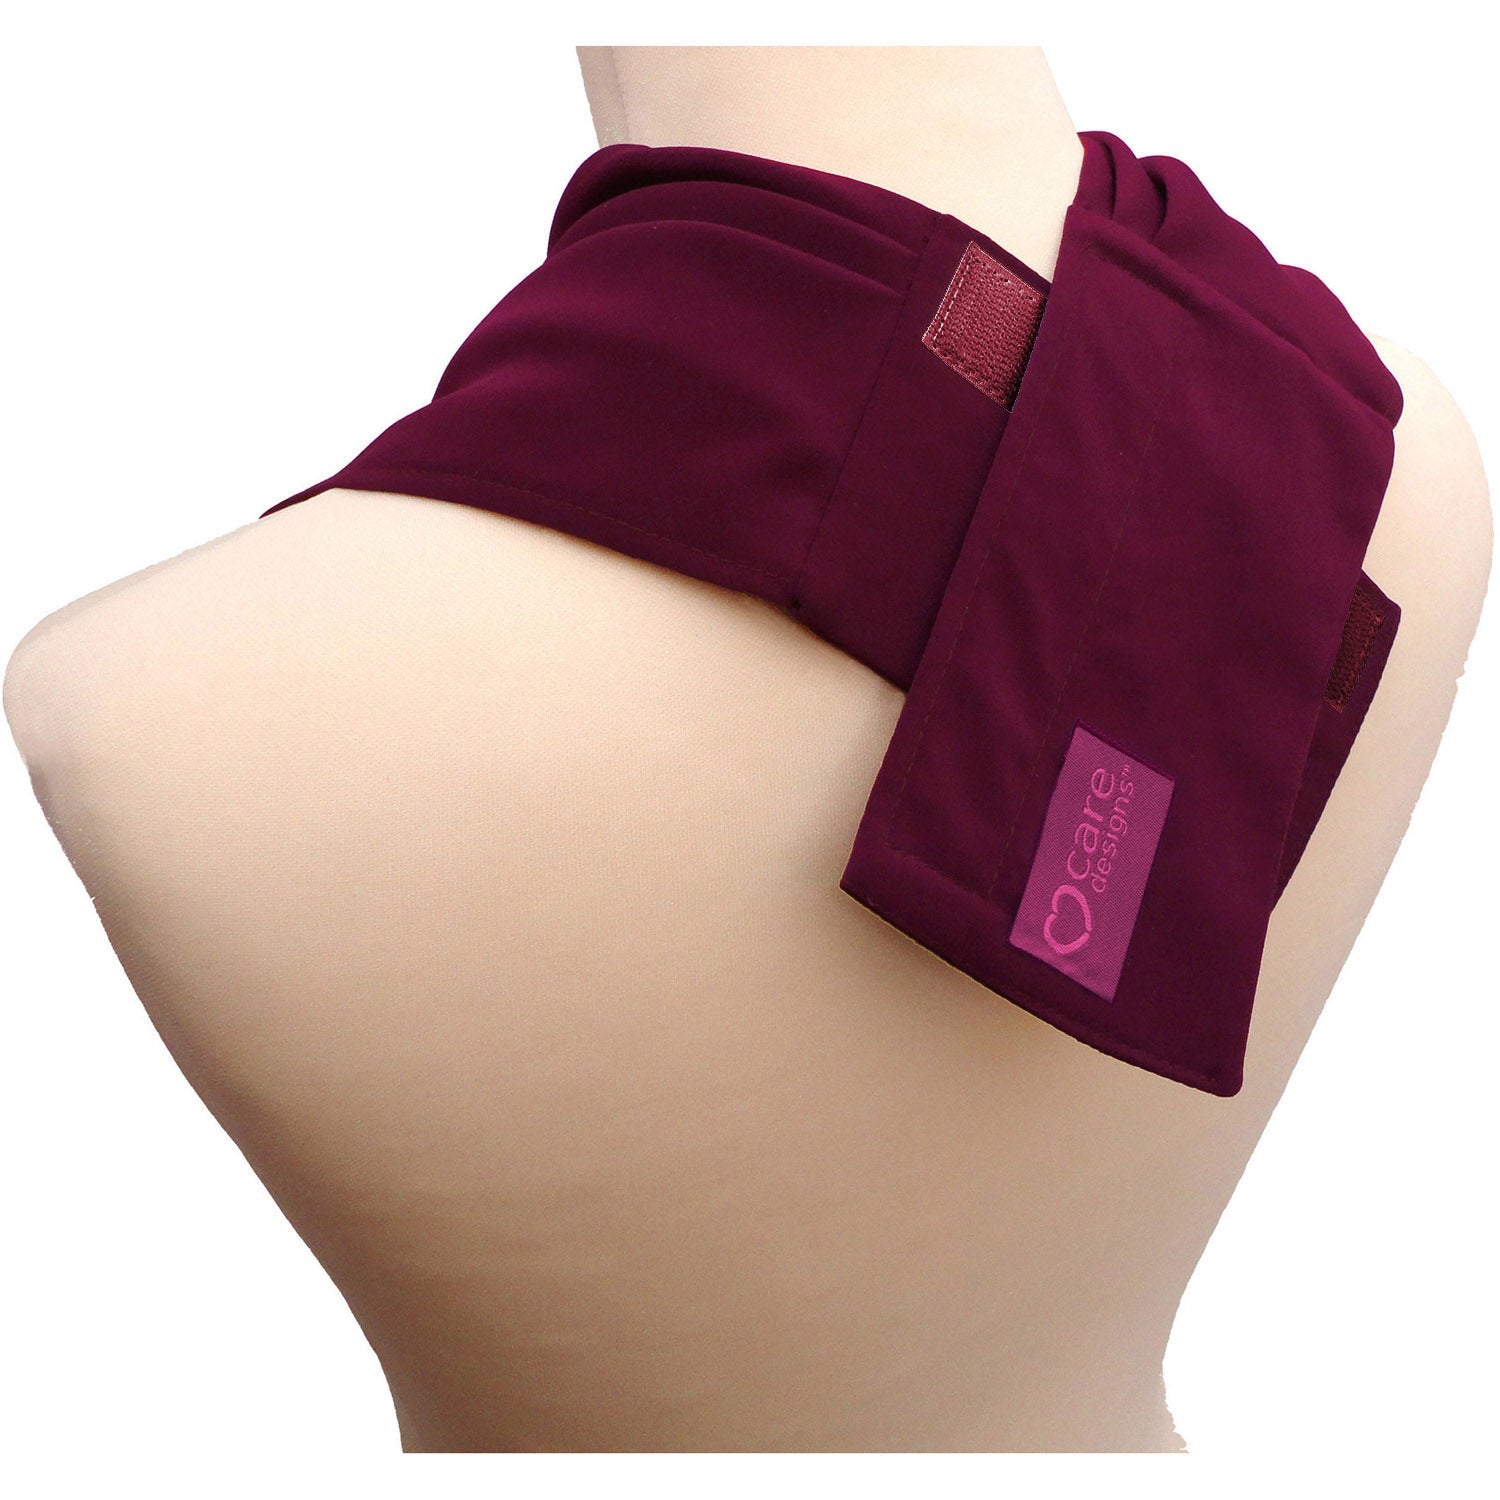 Pashmina scarf style clothing protector - Burgundy (UK VAT Exempt) | Health Care | Care Designs